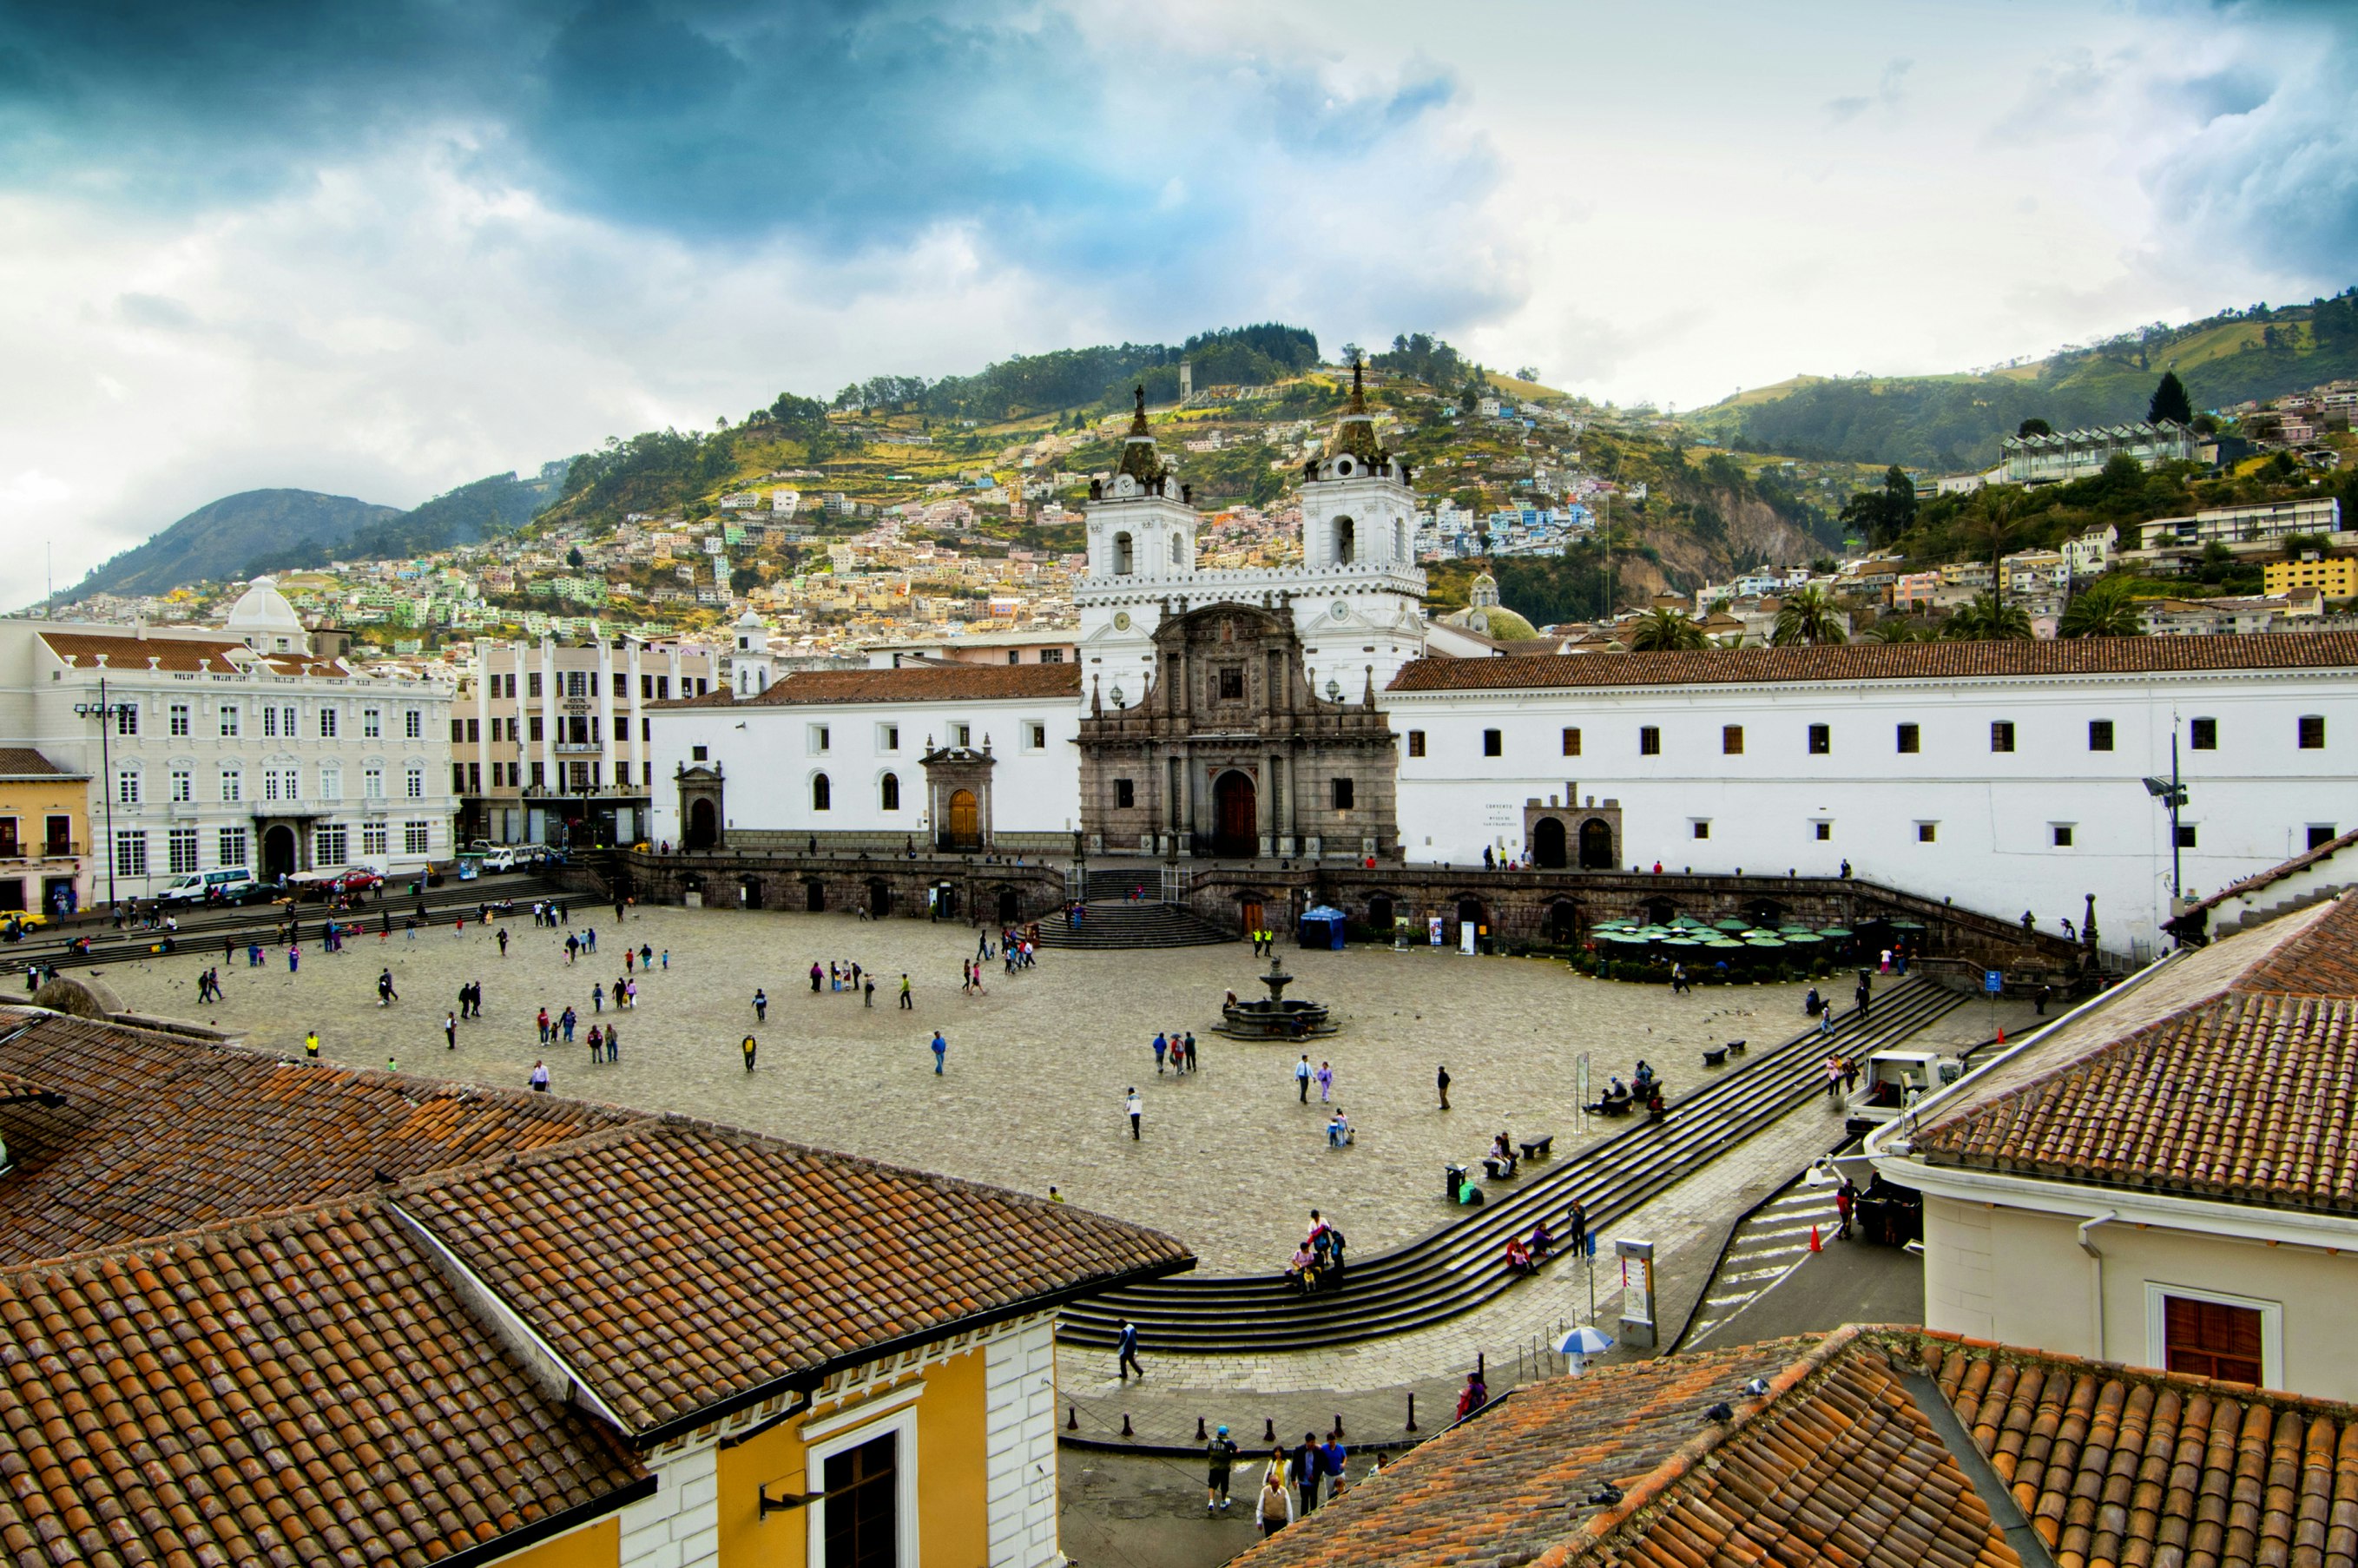 Quito old town in Ecuador by Getty Images